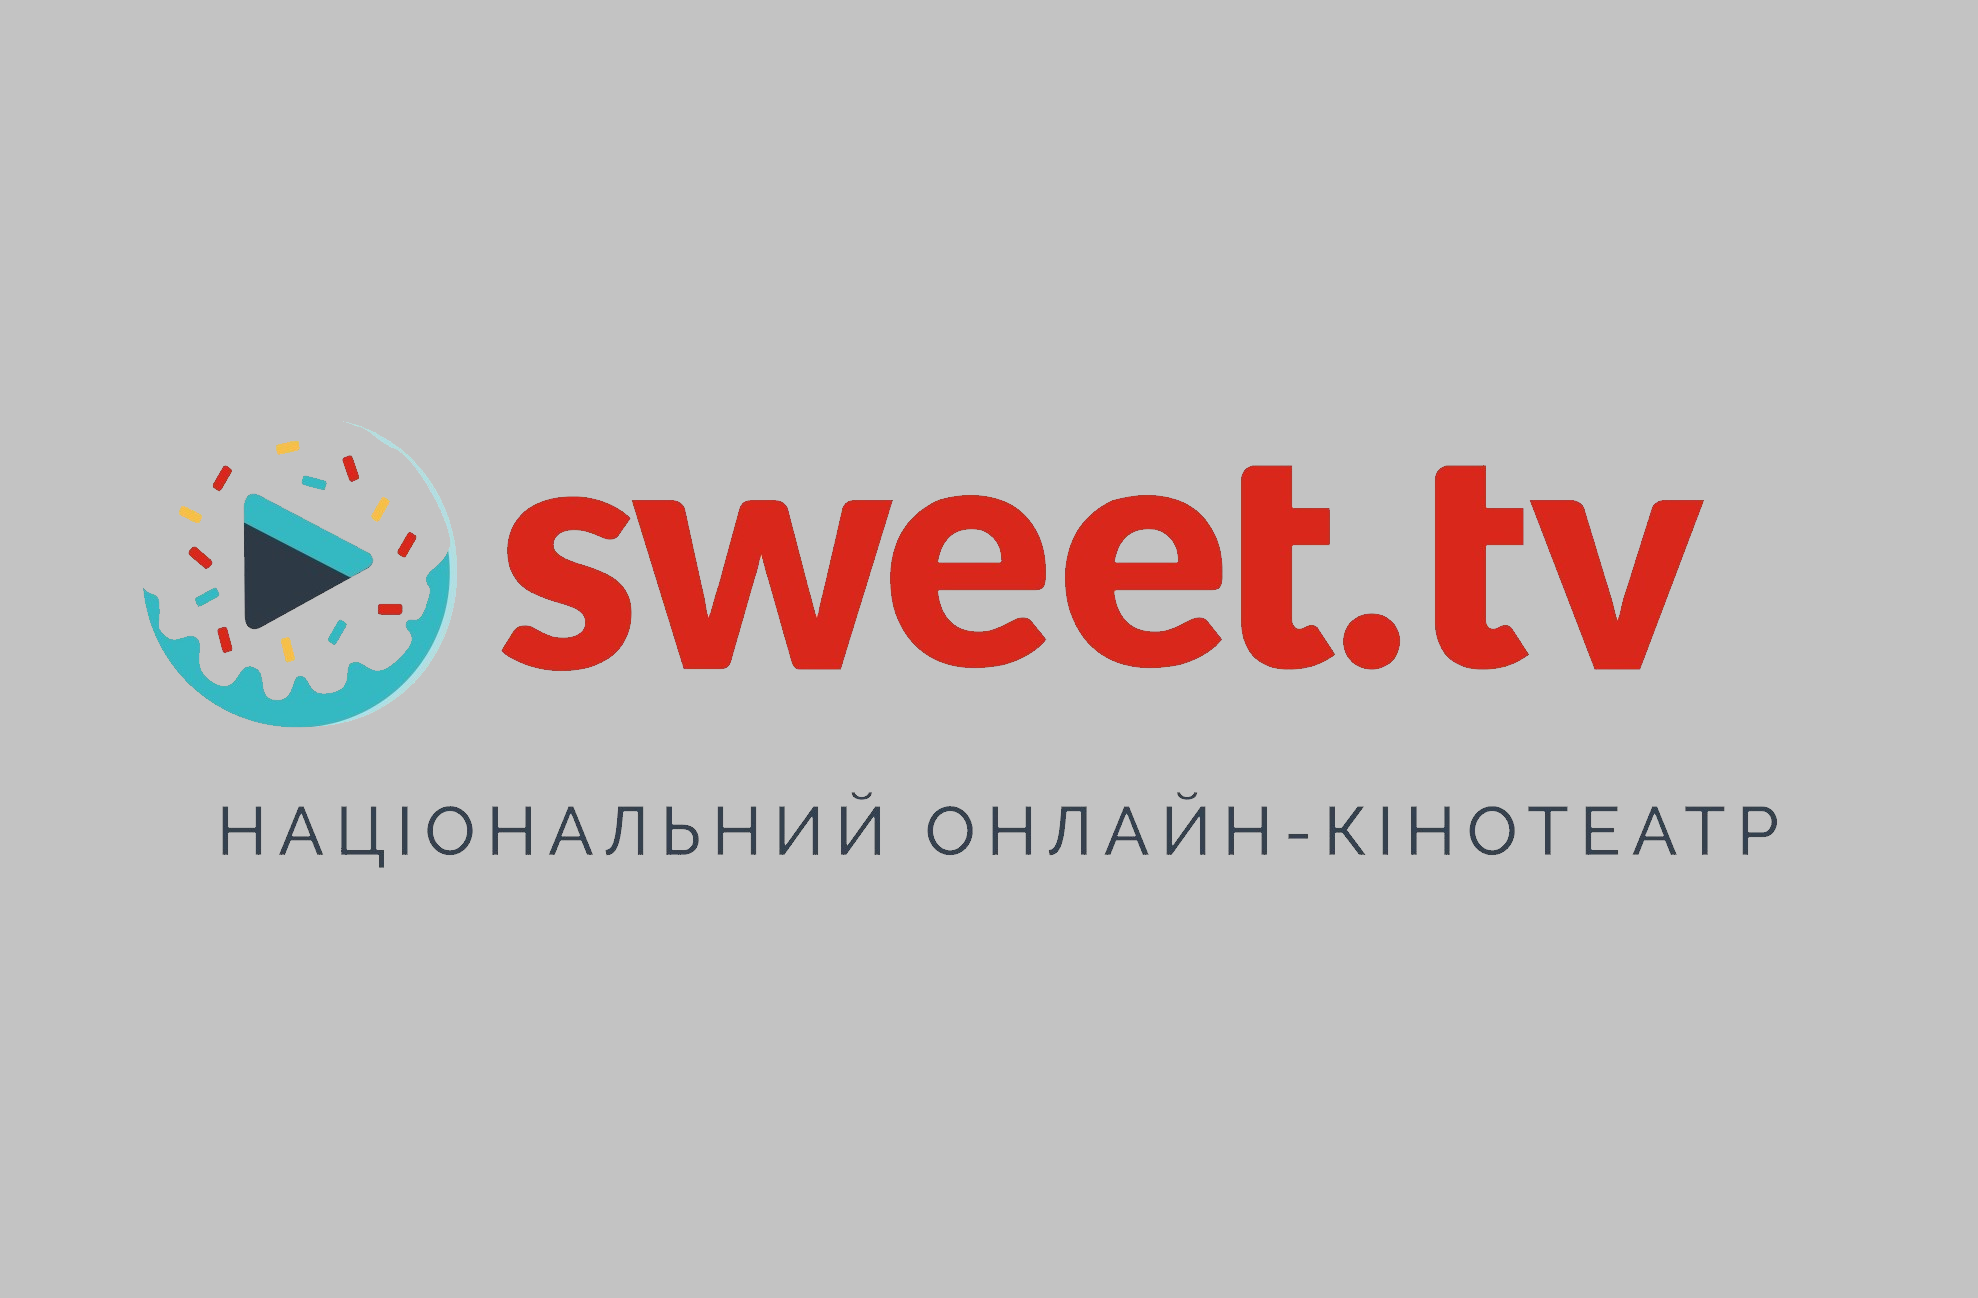 Three months viewing of the SWEET.TV online cinema with the purchase of the MYSTERY SmartTV